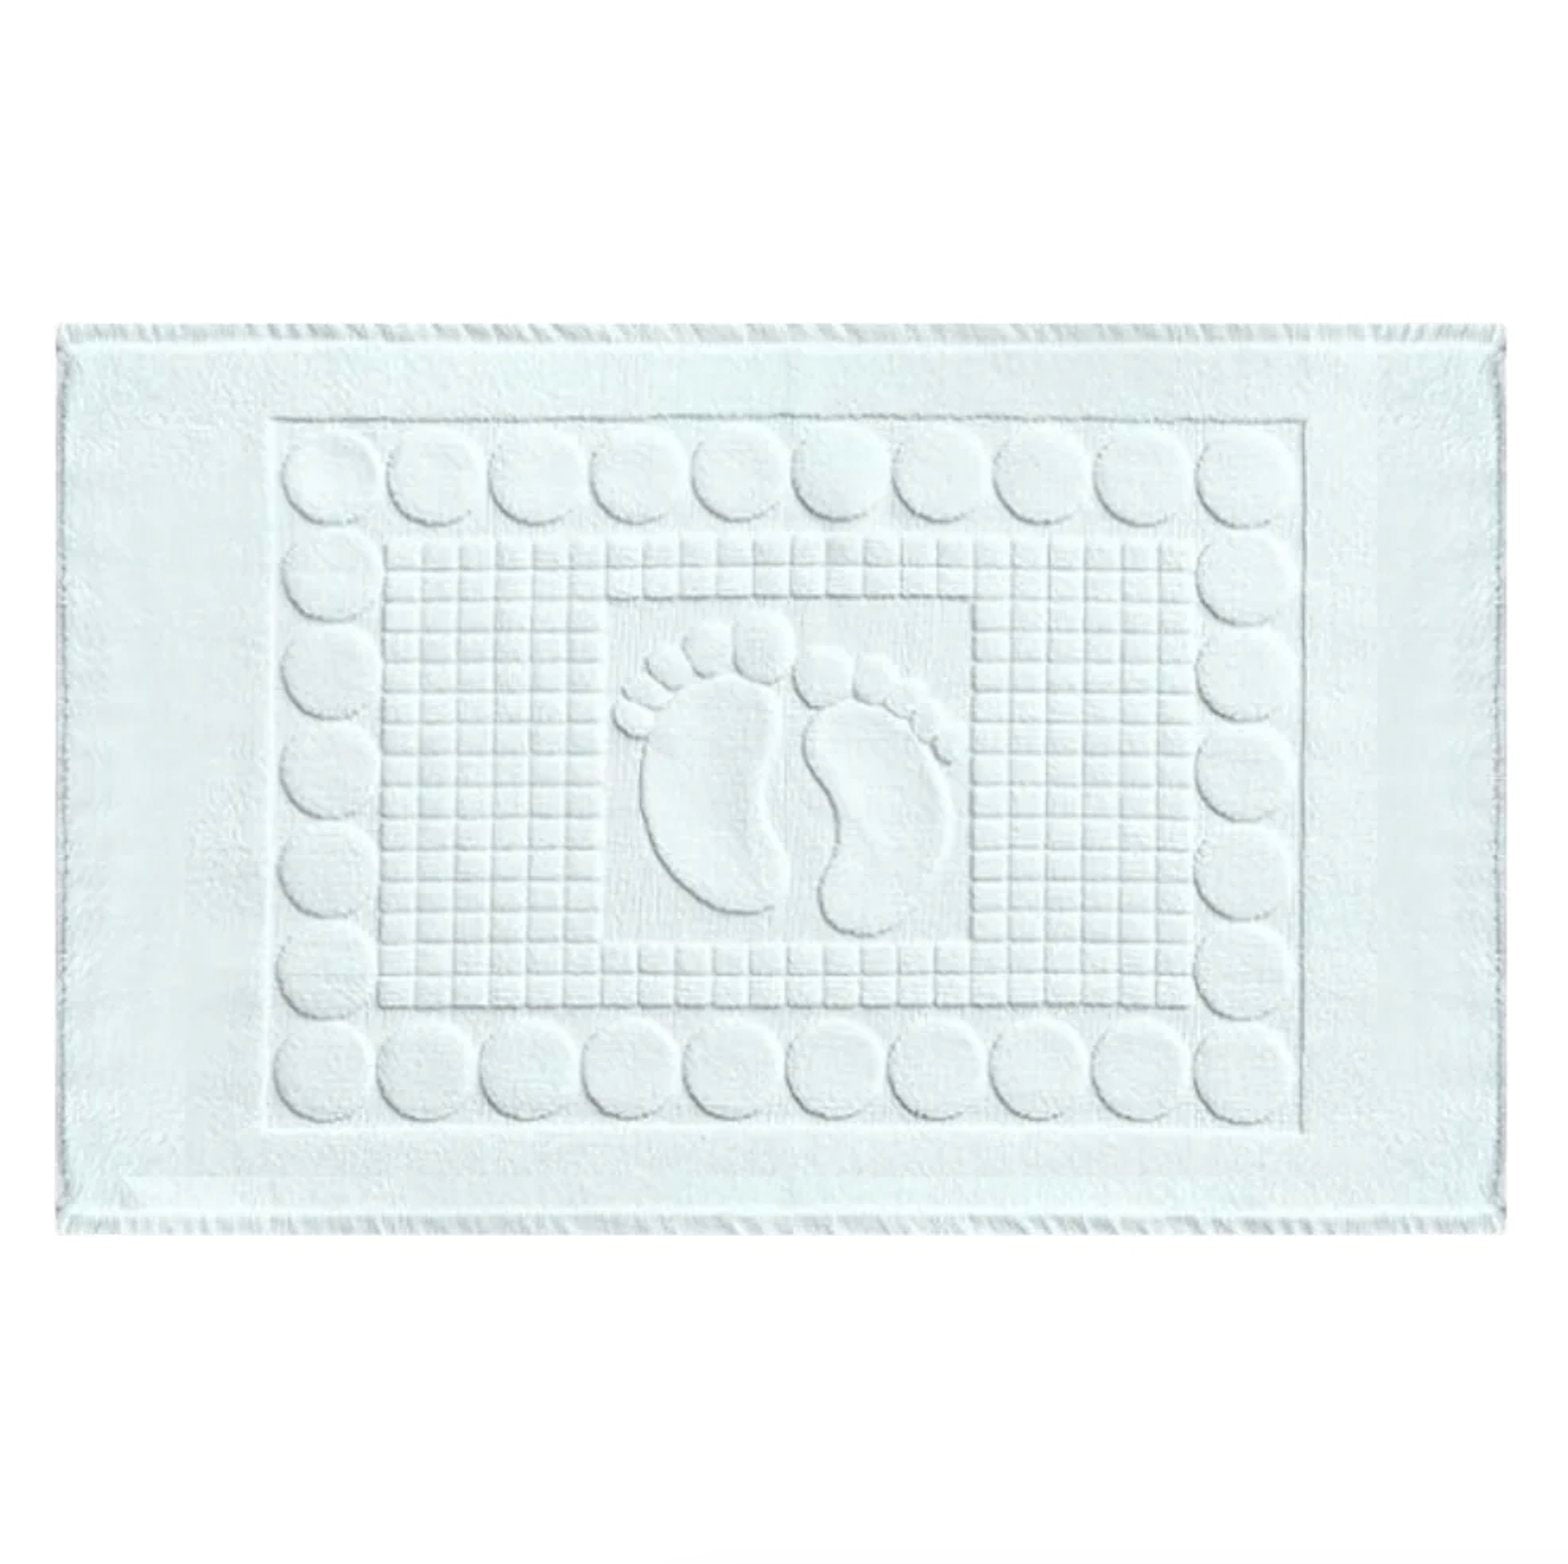 Bath mats that are soft, absorbent mats for a luxurious and comfortable bathroom experience.